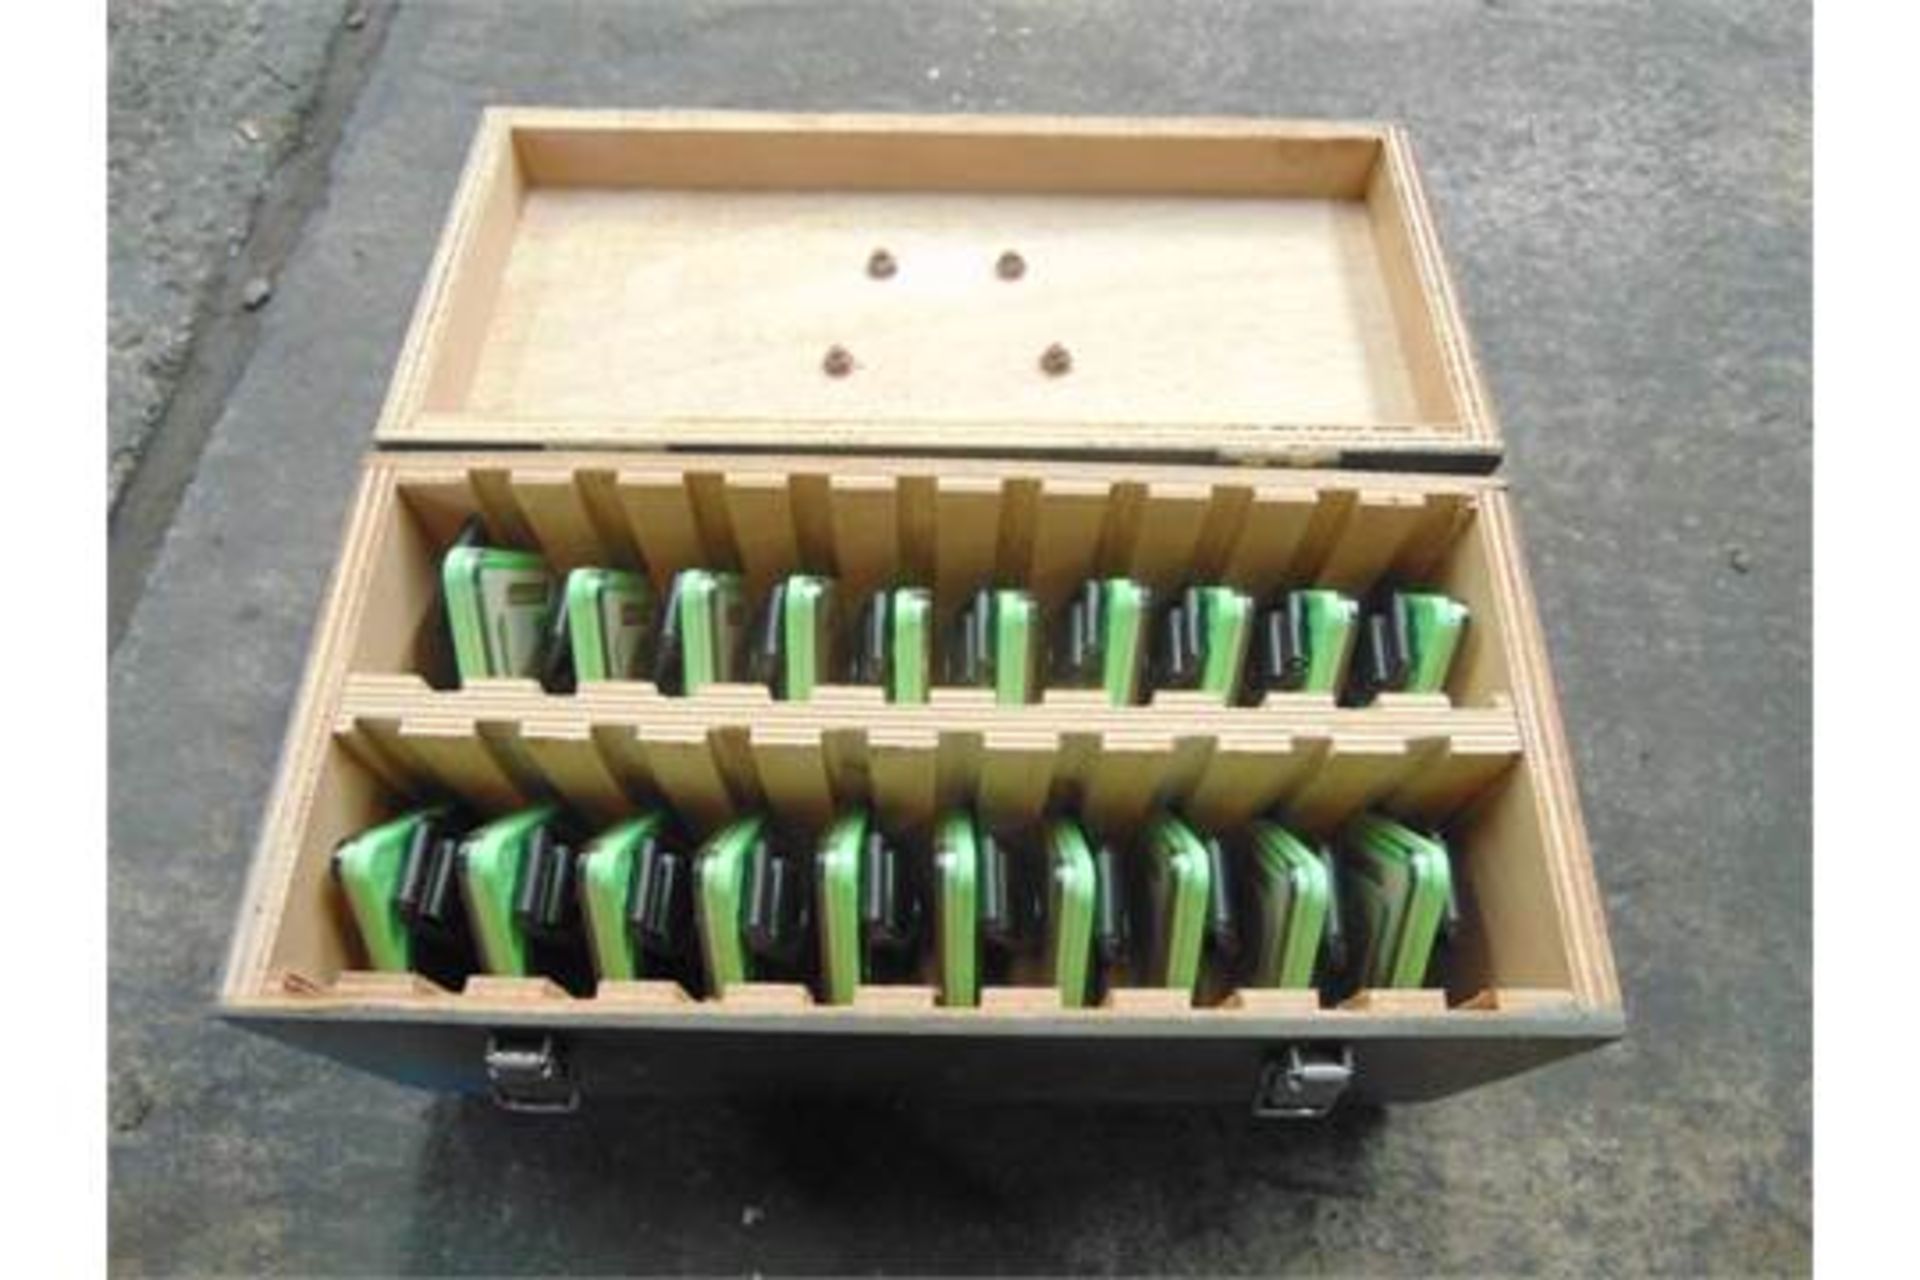 20 x Very Rare British Army Glow In The Dark Green Route Markers in Wooden Transit Case - Image 5 of 7